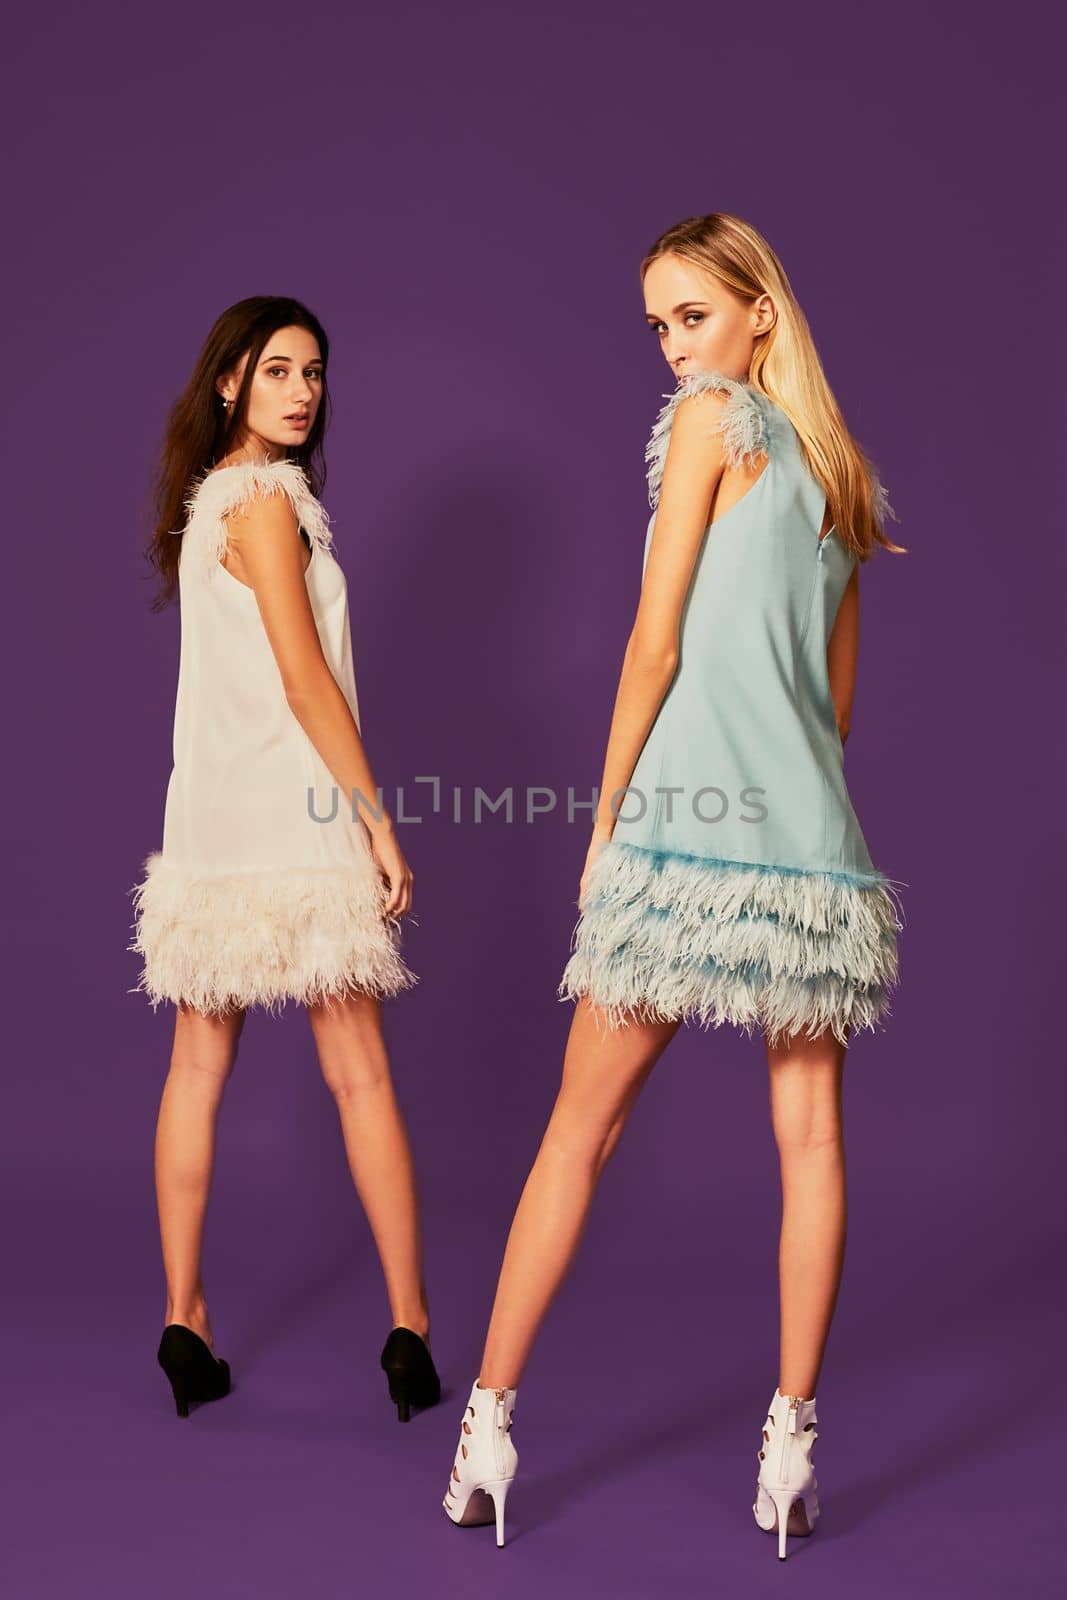 Studio fashion portrait of two elegant young women in cocktail light dresses posing in studio. The blonde in the foreground, the brunette behind her, view from the back